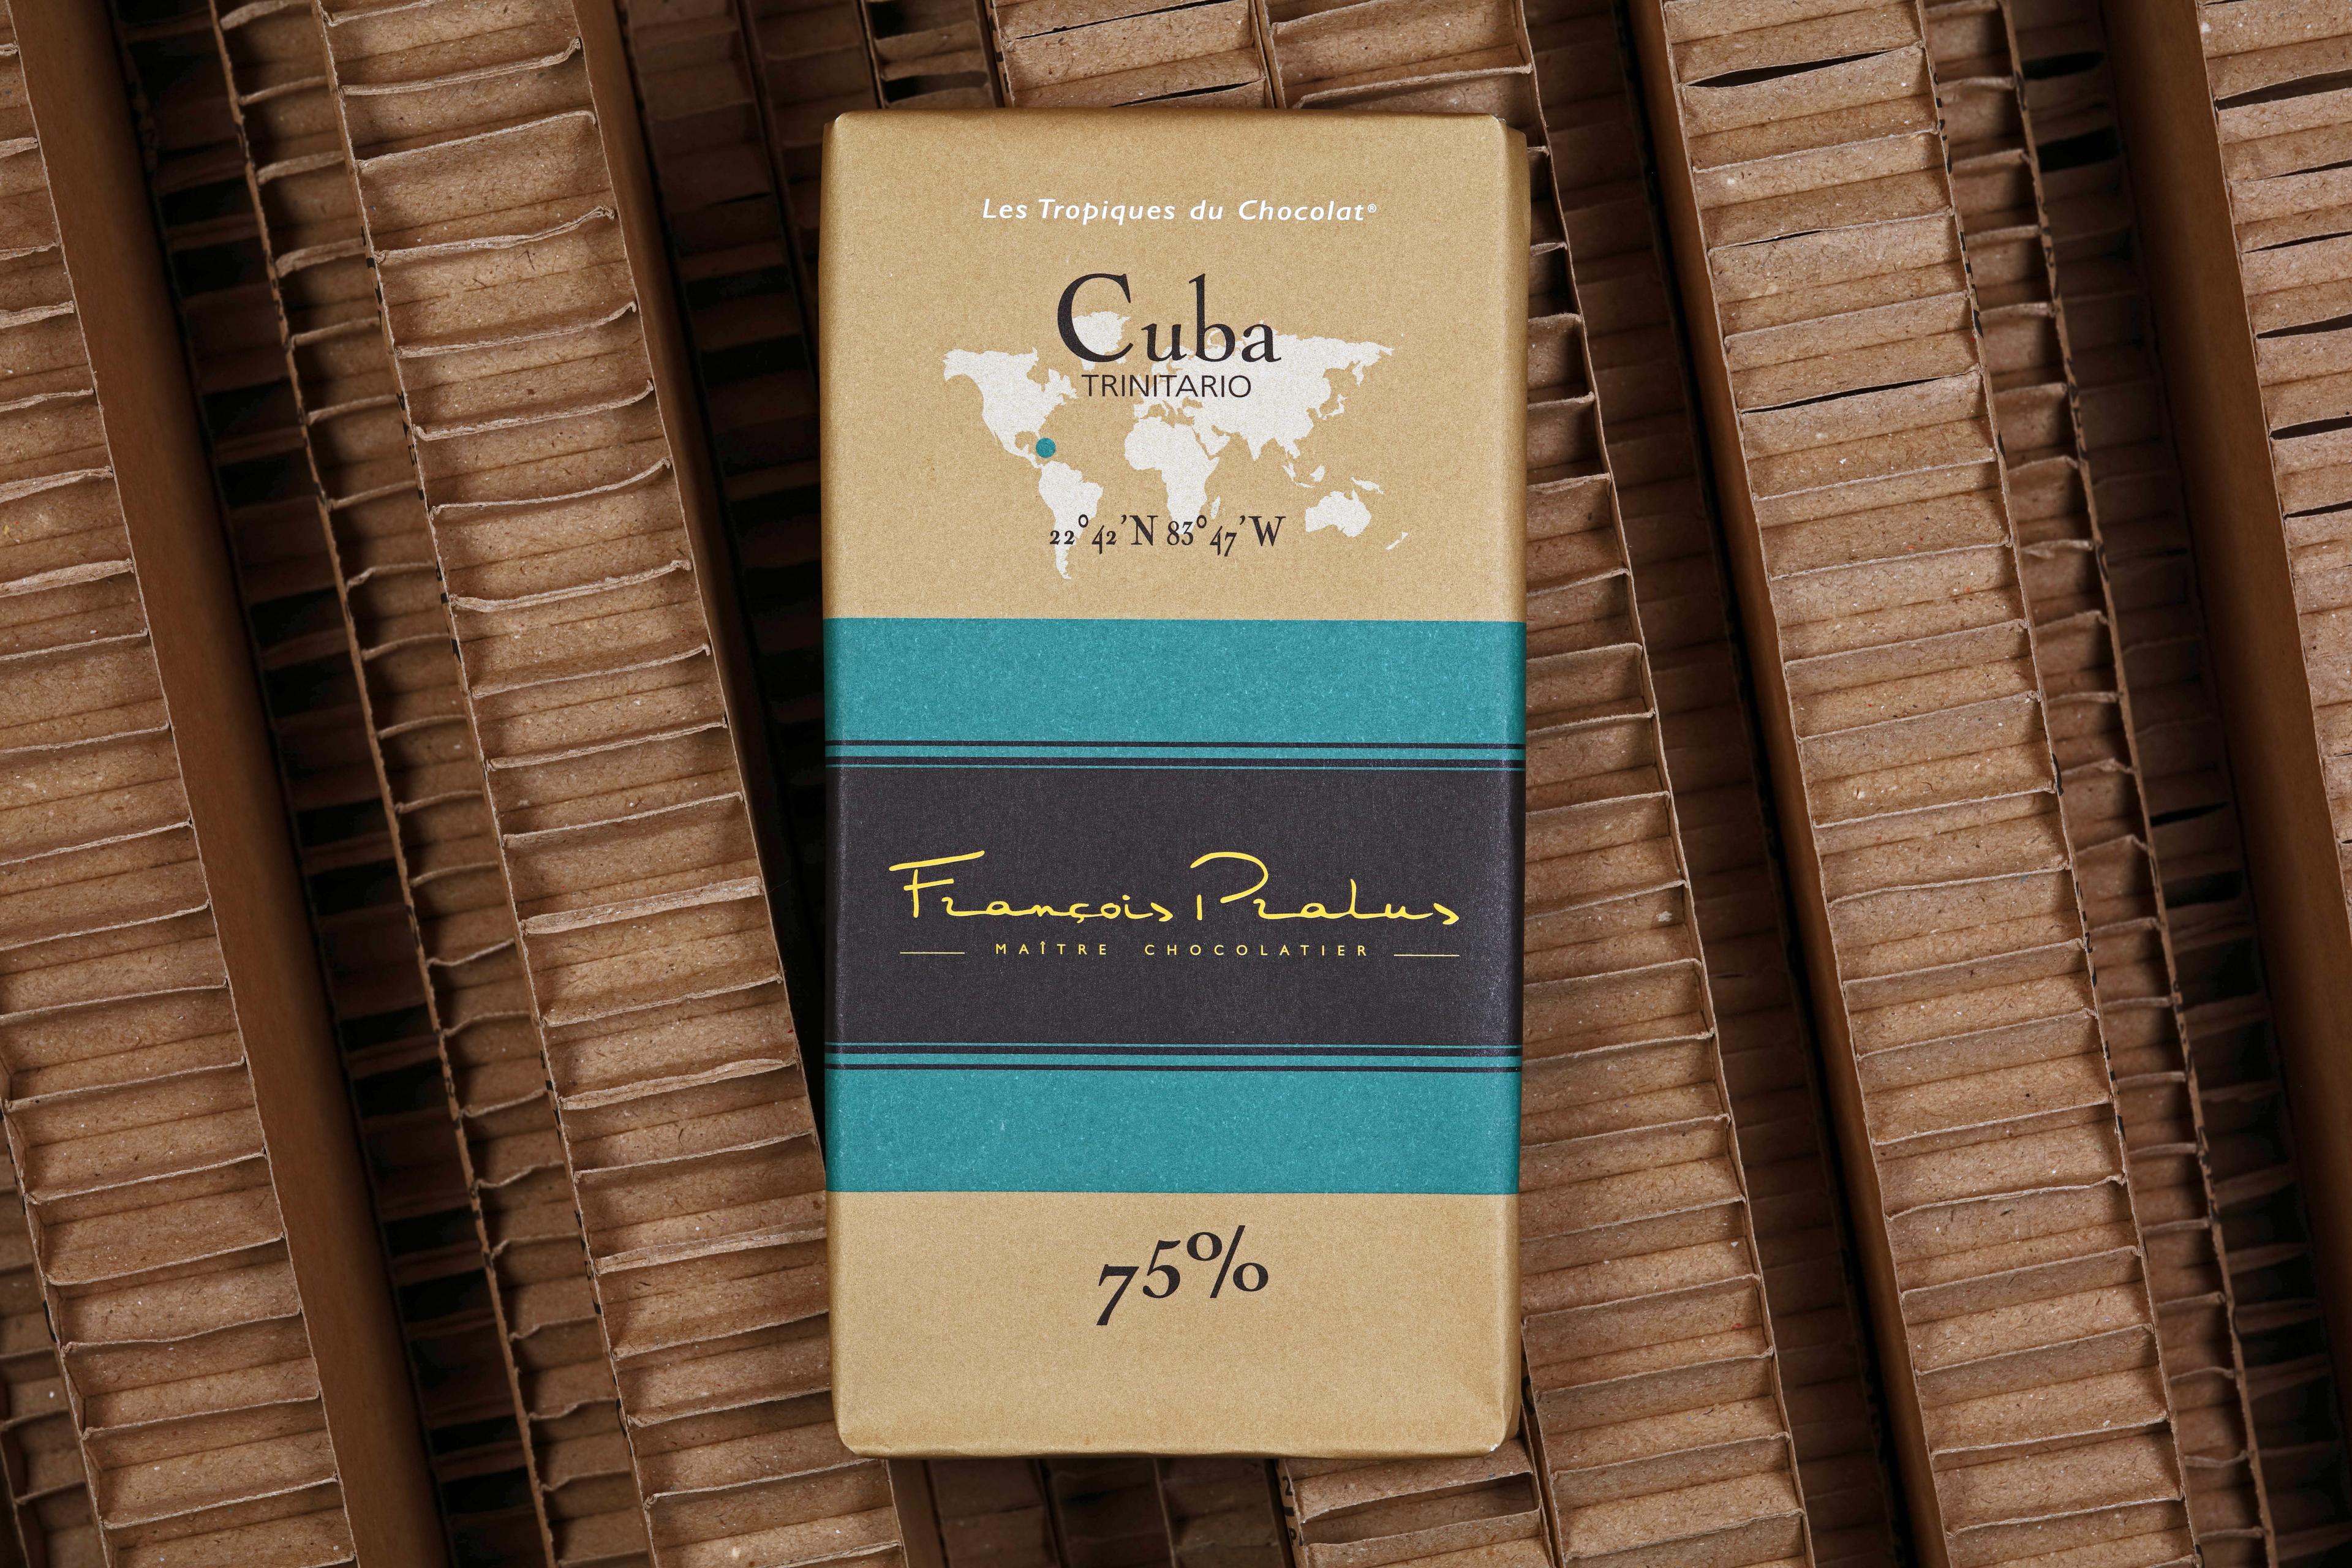 Cuba 75% bar made by François Pralus in France on a vertical cardboard background